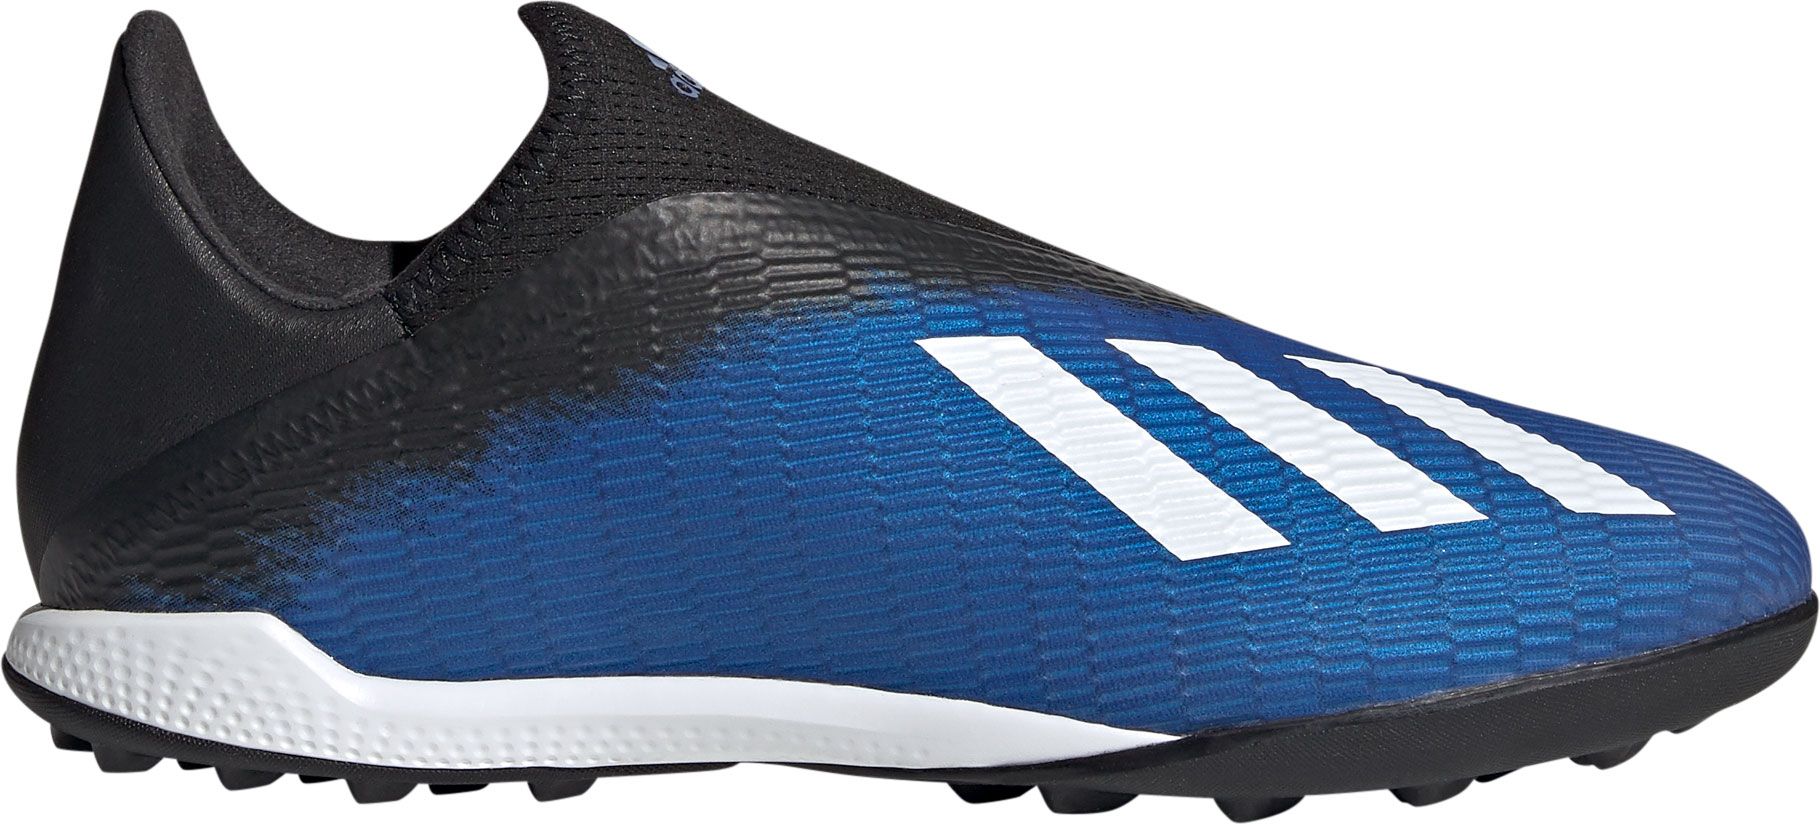 laceless turf soccer shoes